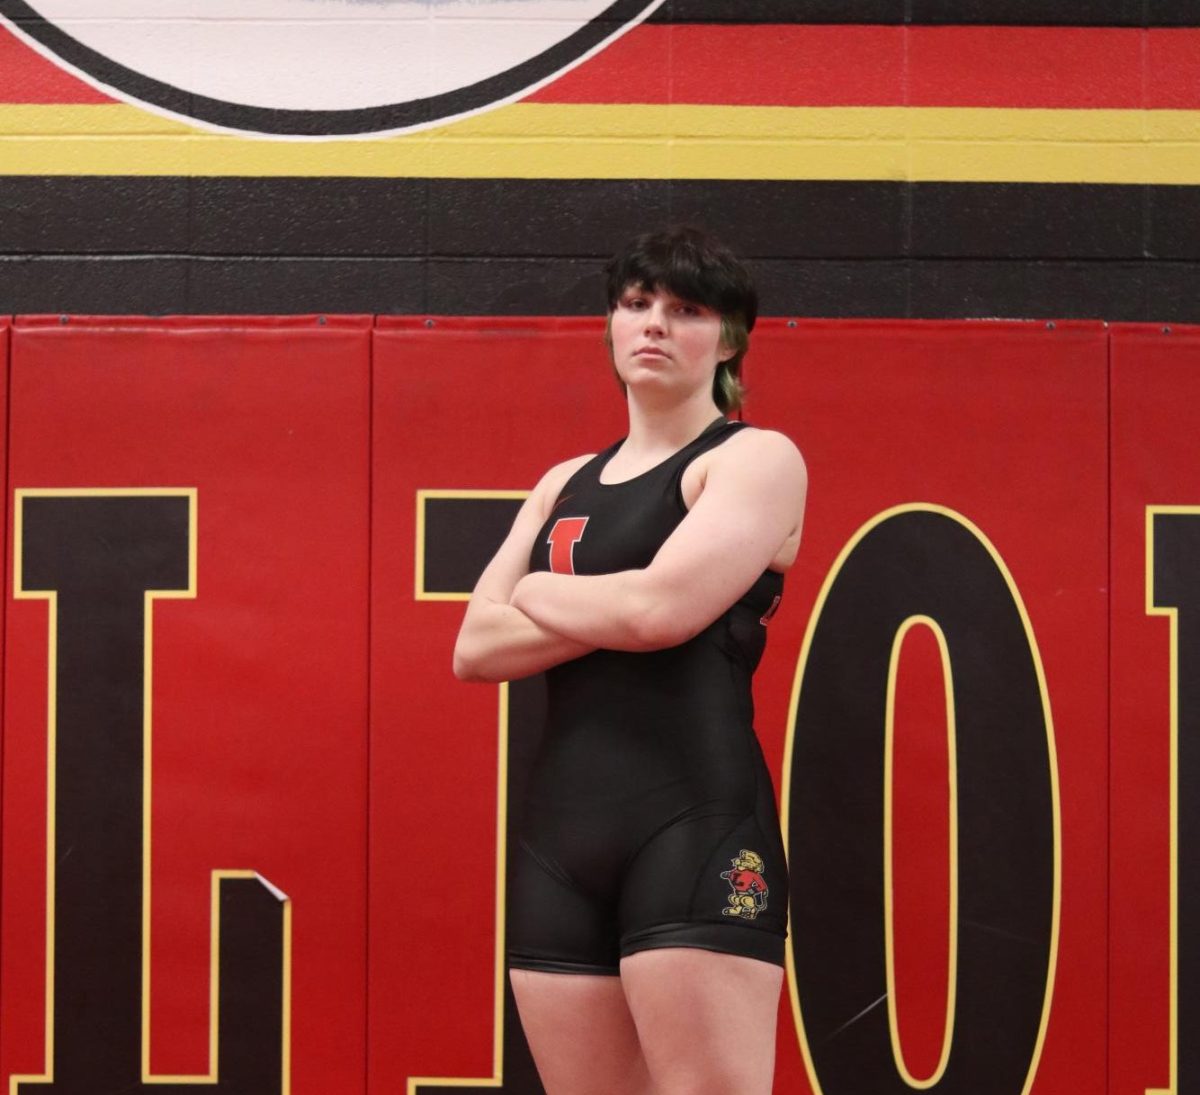 Stephens leads girls wrestling team with confidence